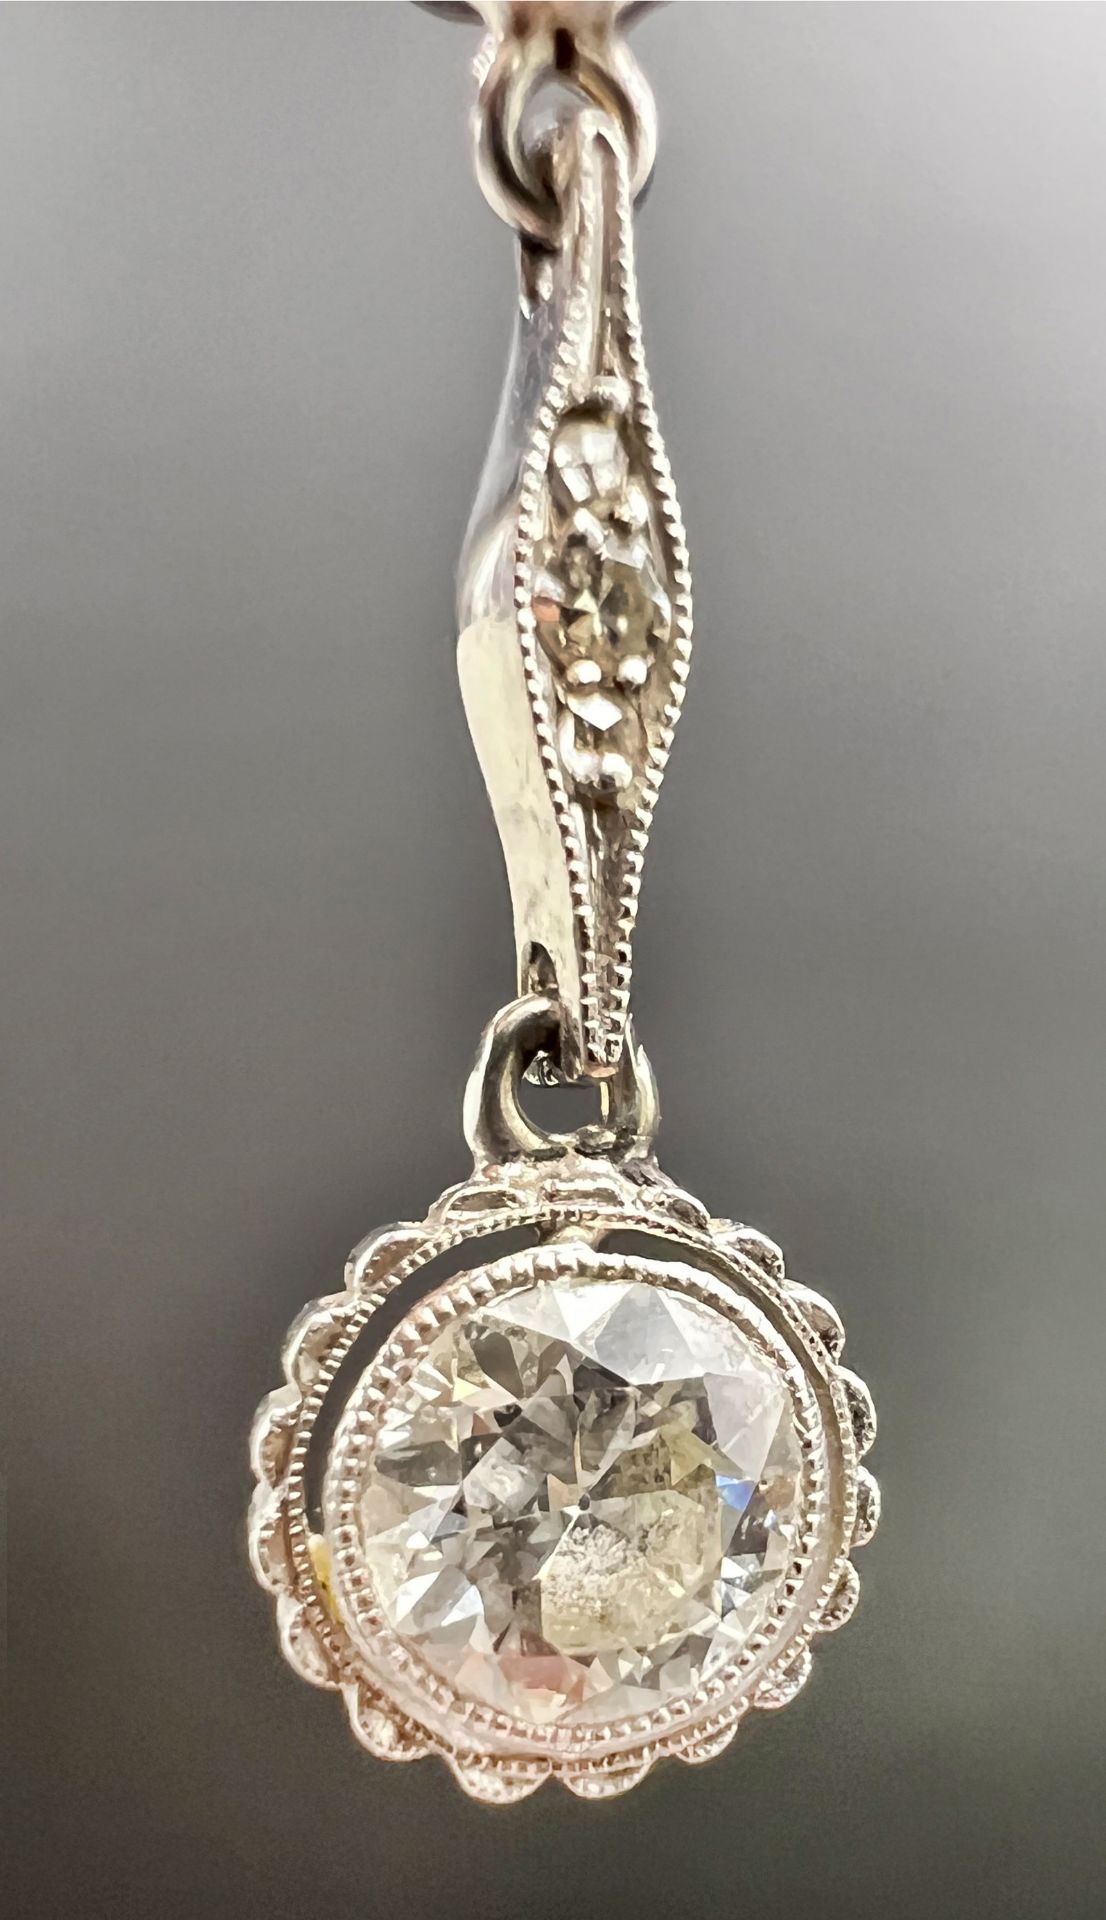 Pendant with chain. 585 white gold with 2 diamonds. Art deco. - Image 7 of 12